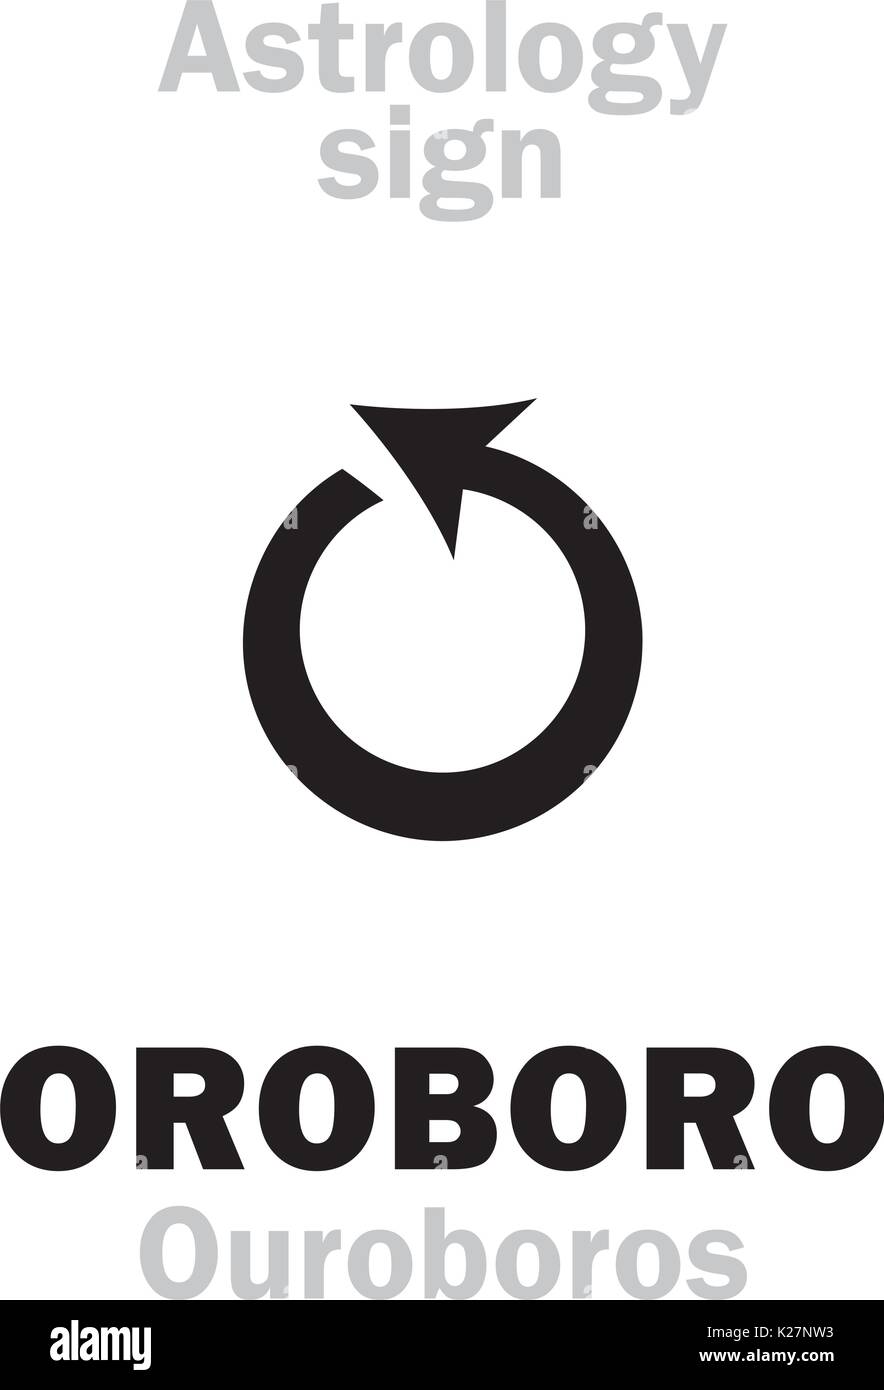 Astrology Alphabet: OROBORO (Ouroboros), Serpent devouring its own tail. Hieroglyphics character sign (single symbol). Stock Vector